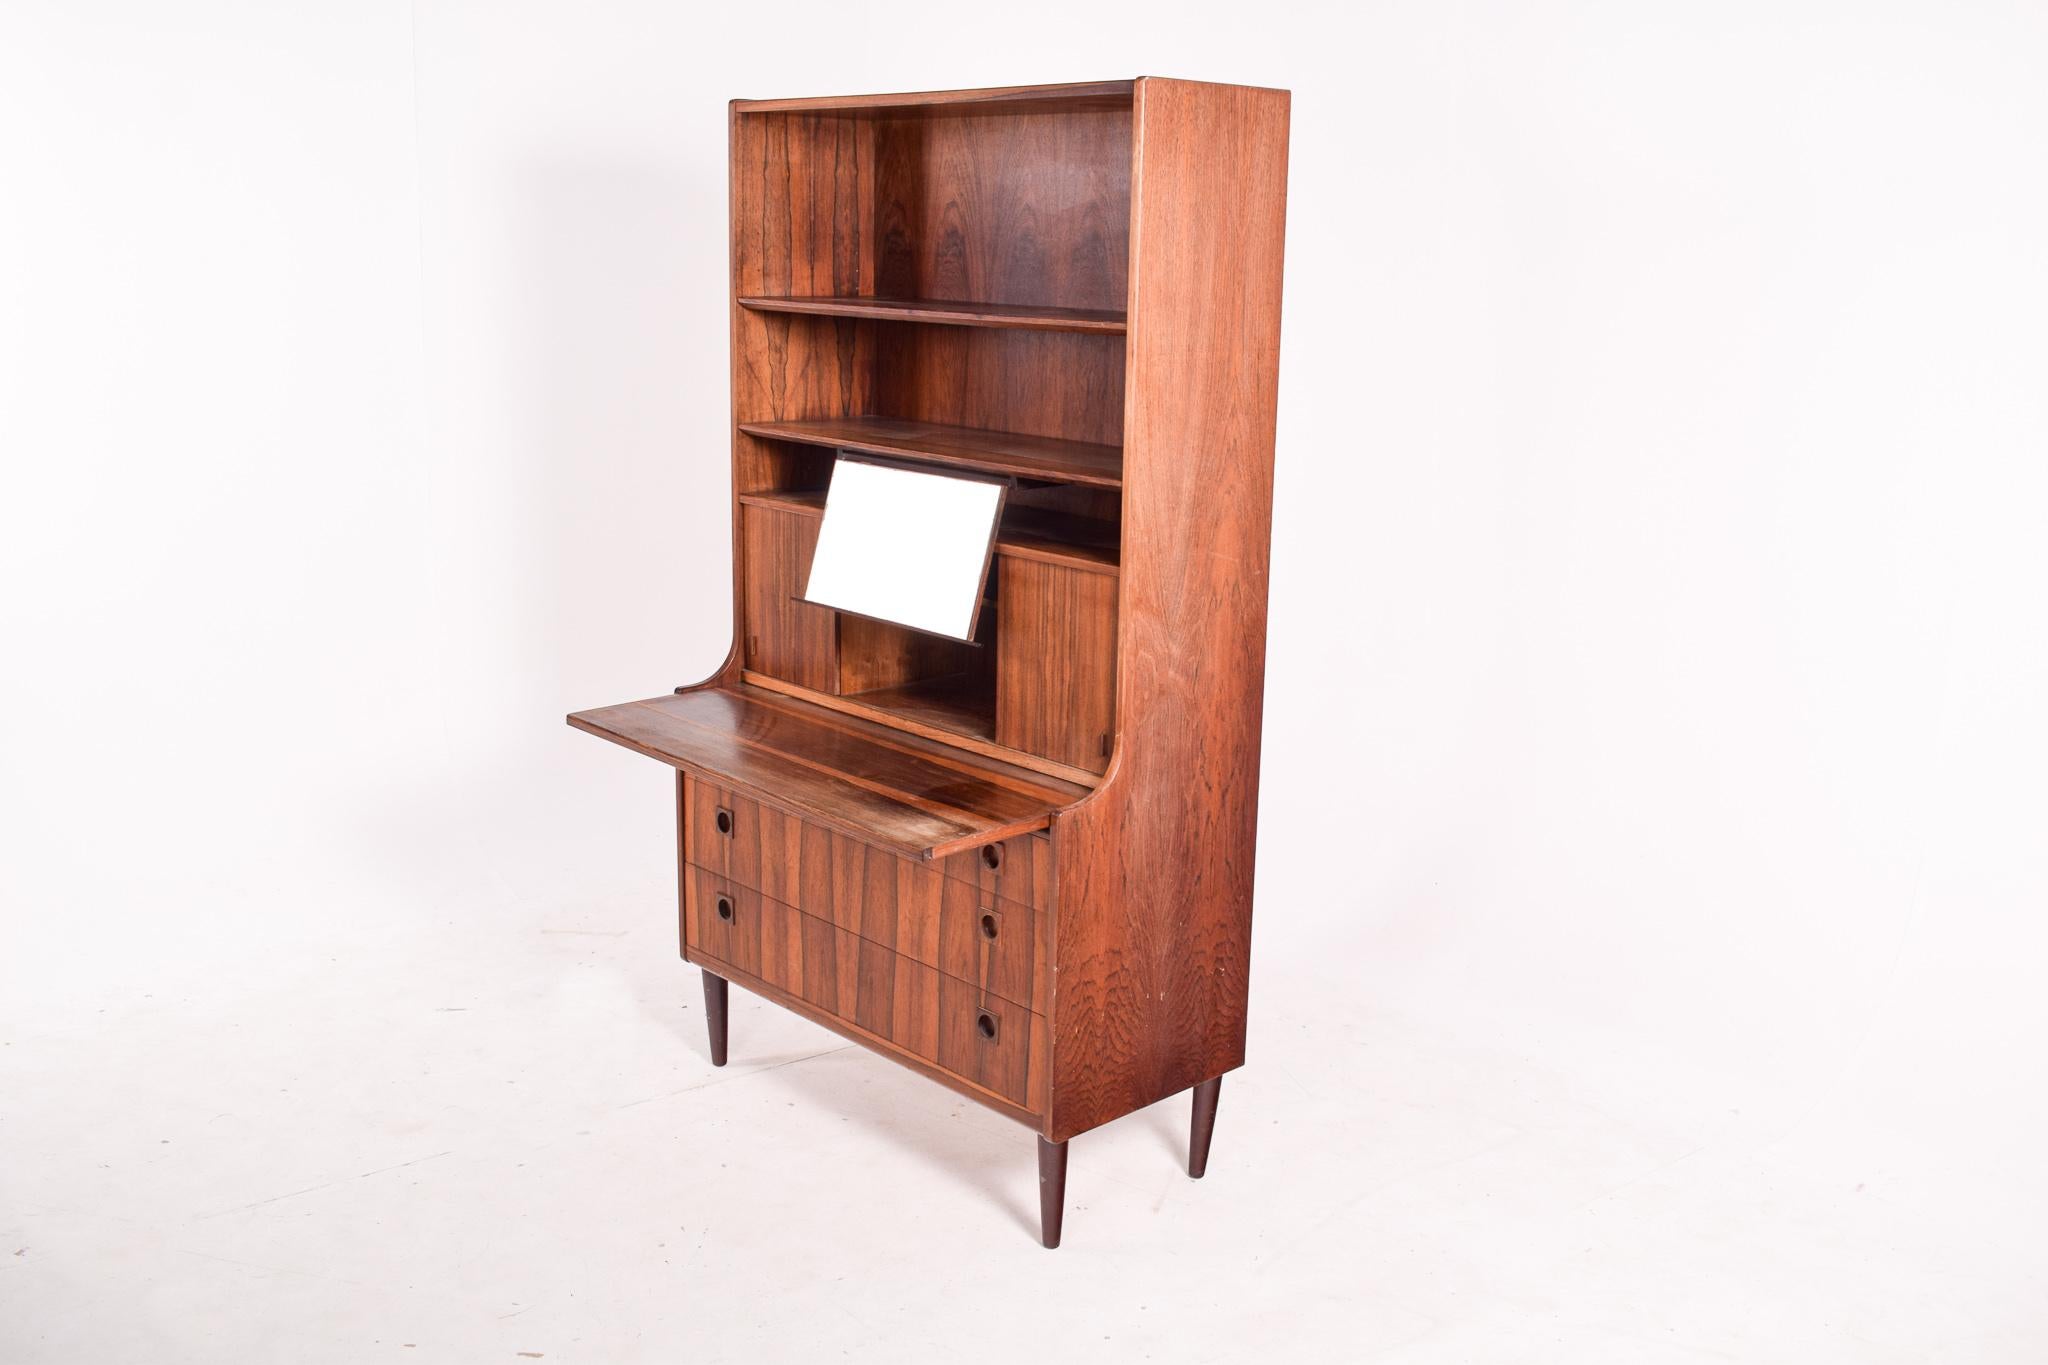 Mid-20th Century Danish Rosewood Desk and Bookcase with Sliding Doors, 1950 For Sale